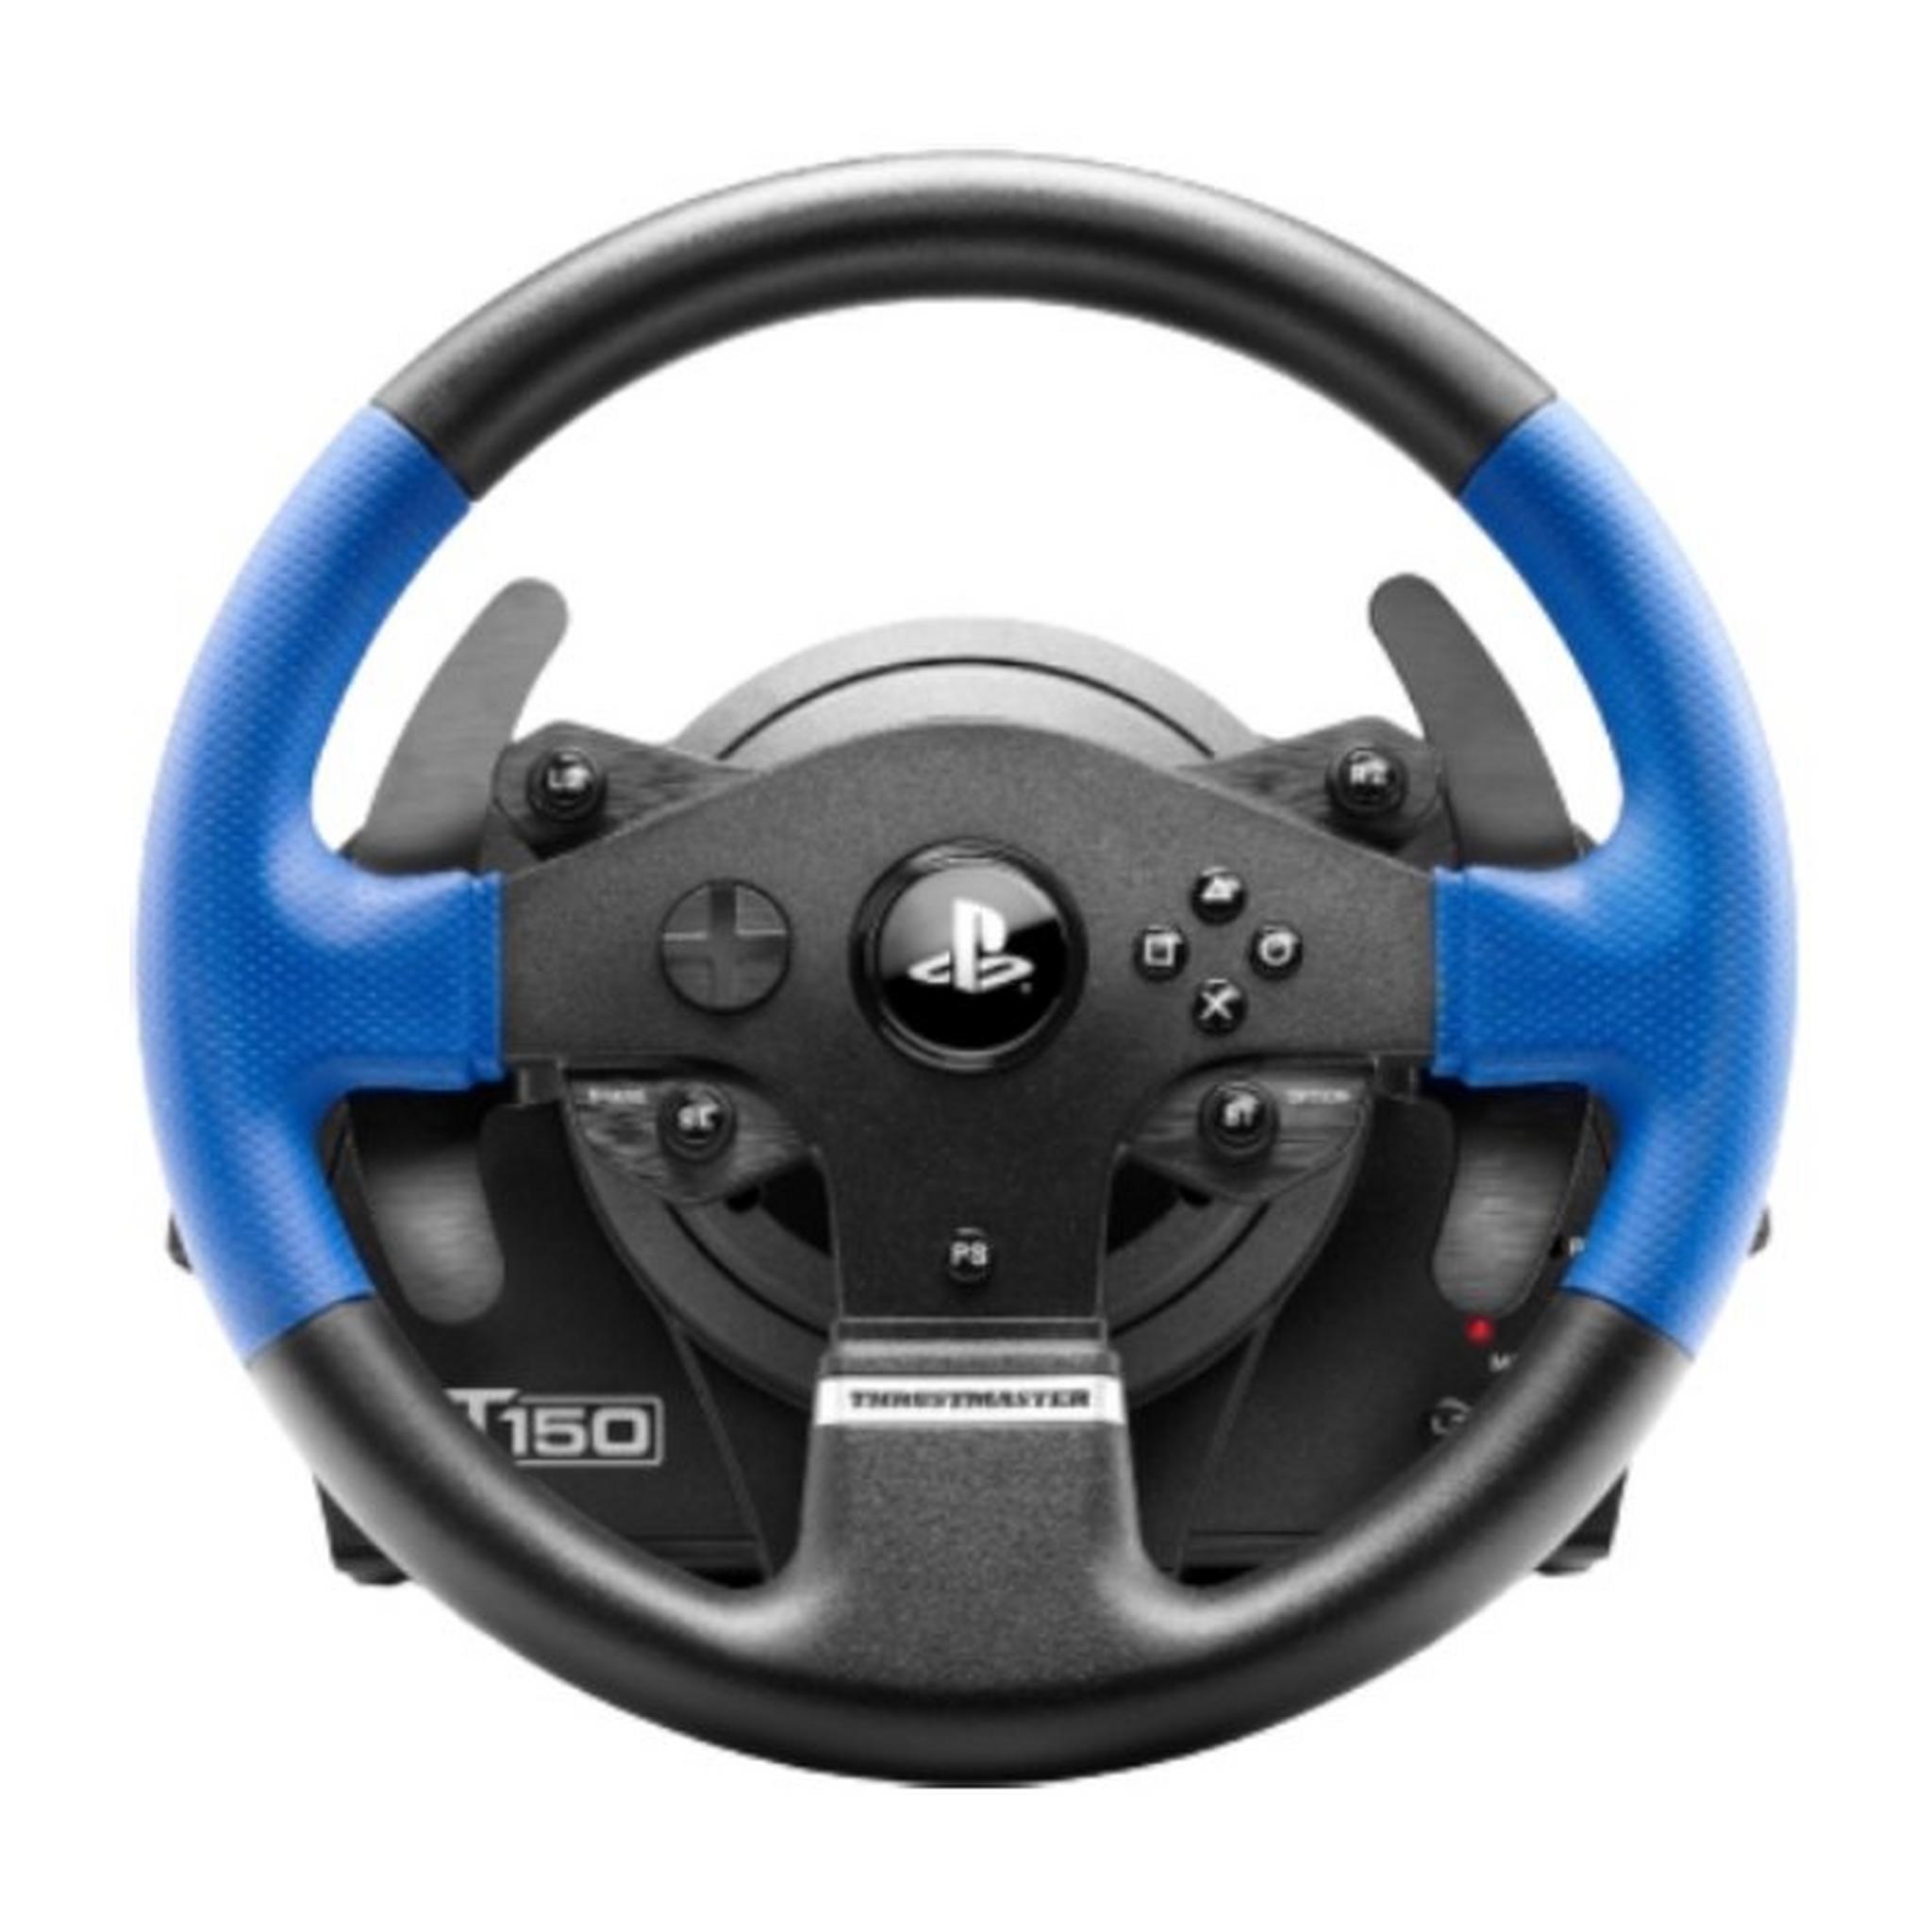 Thrustmaster T150 Force Feedback EU Version Racing Wheel for PS4